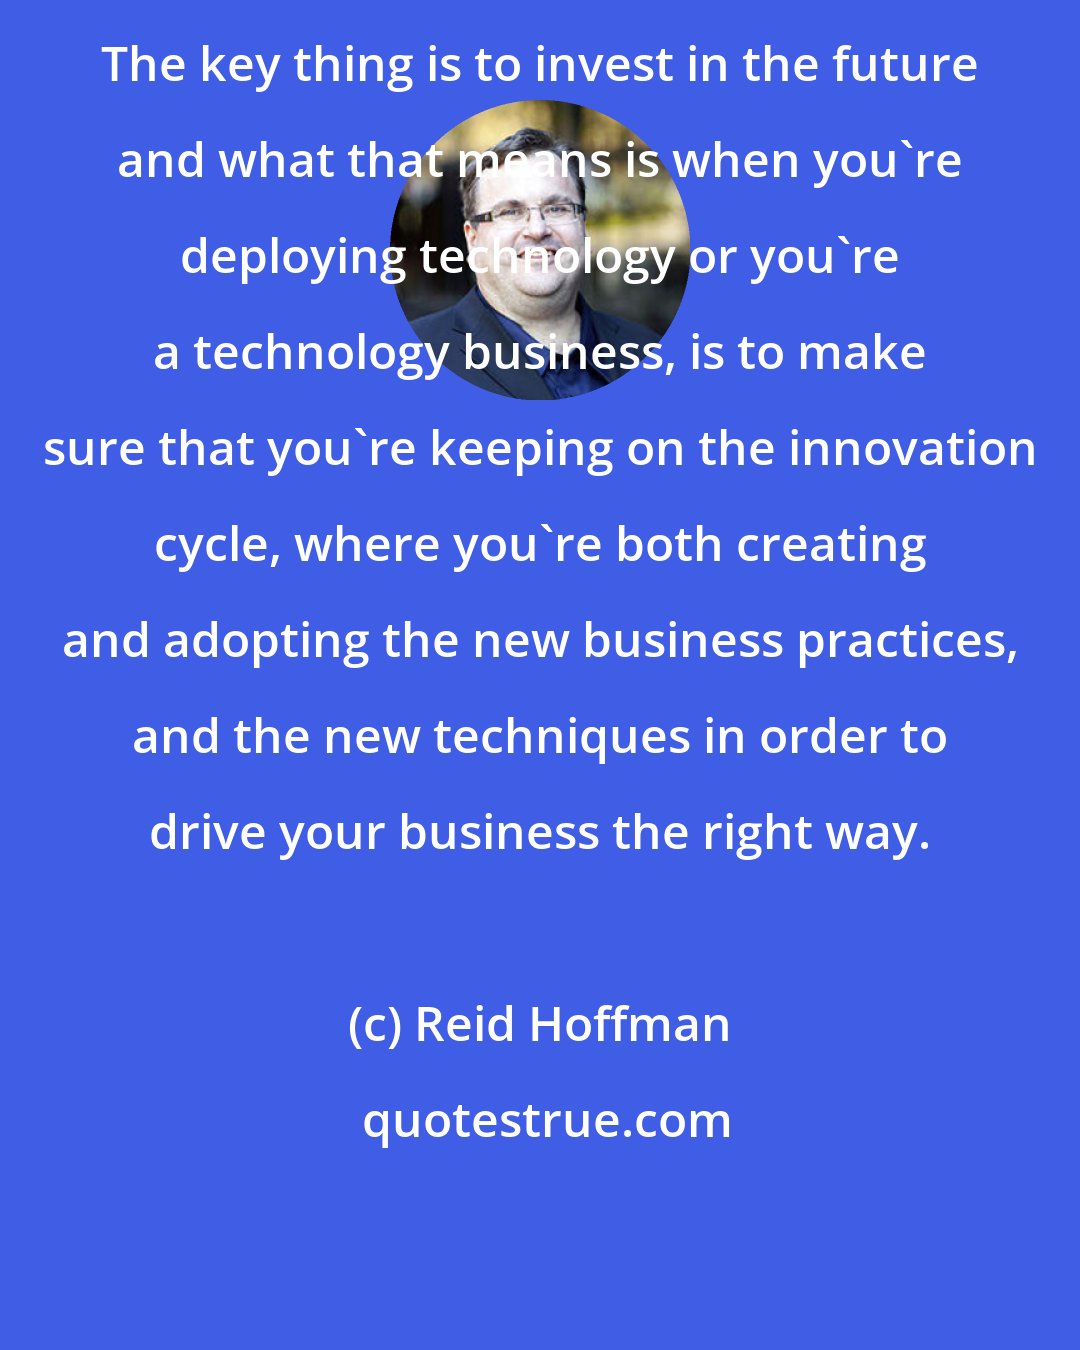 Reid Hoffman: The key thing is to invest in the future and what that means is when you're deploying technology or you're a technology business, is to make sure that you're keeping on the innovation cycle, where you're both creating and adopting the new business practices, and the new techniques in order to drive your business the right way.